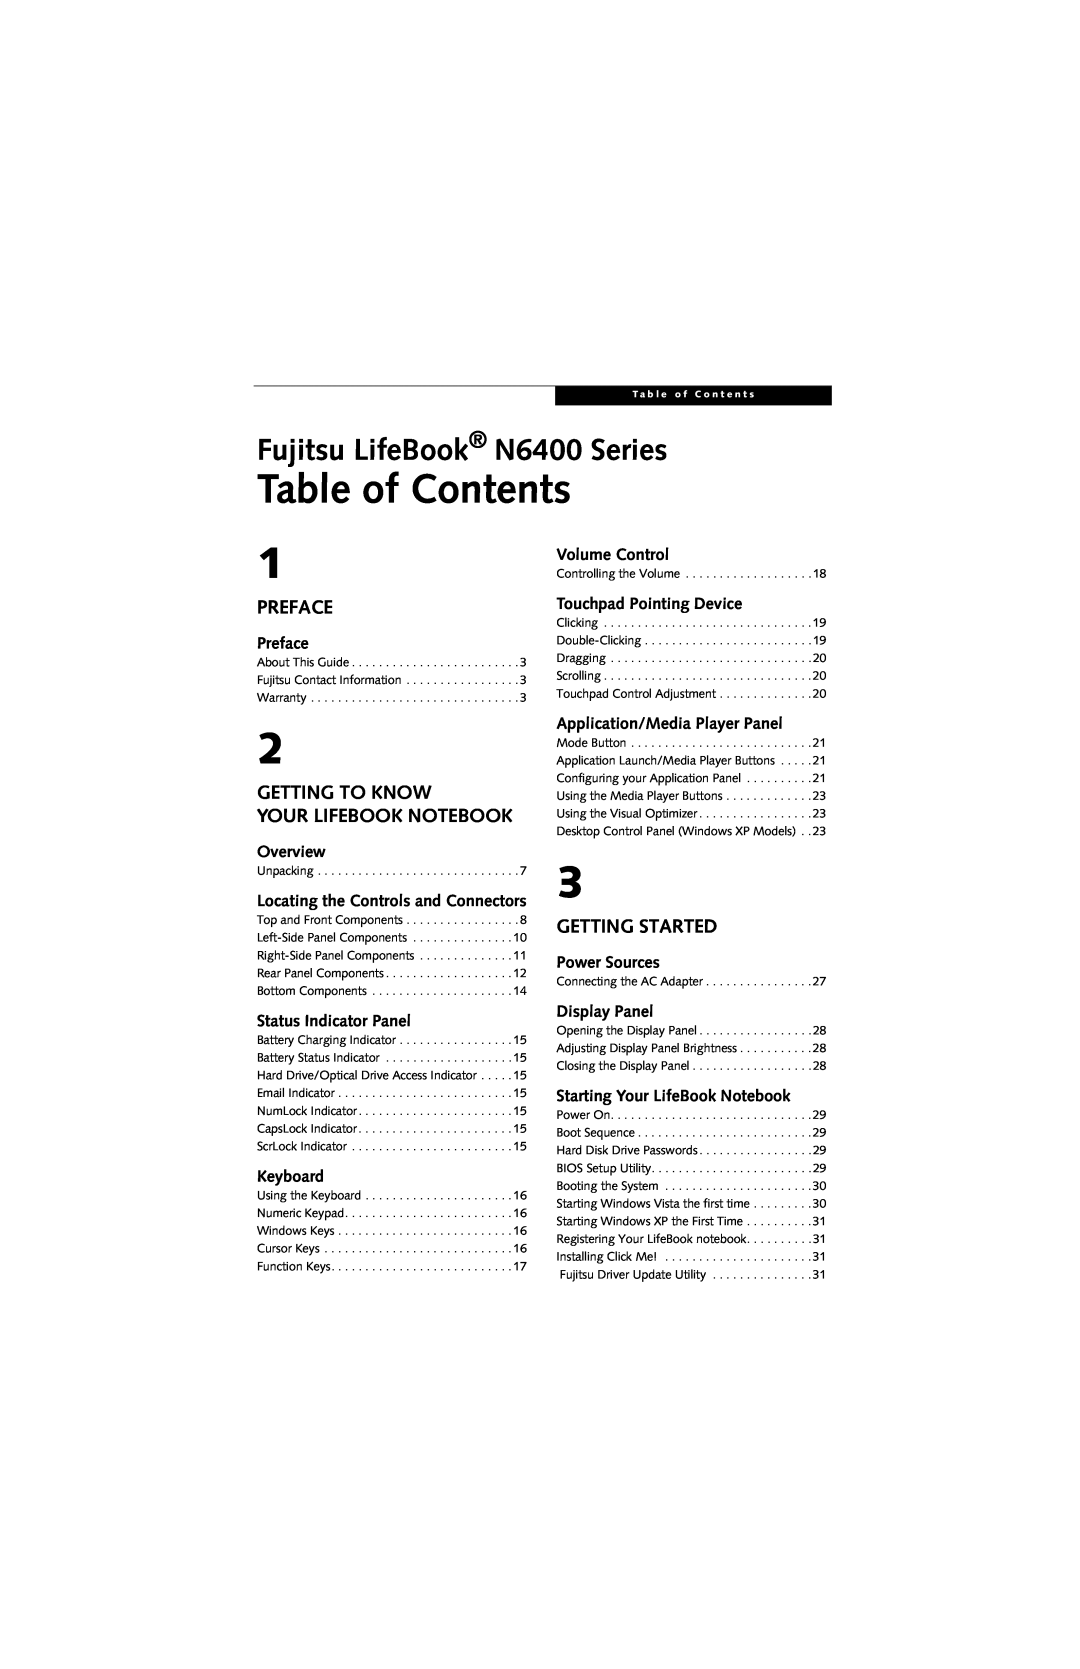 Fujitsu N6420 manual Table of Contents, Preface, Getting To Know Your Lifebook Notebook, Getting Started 